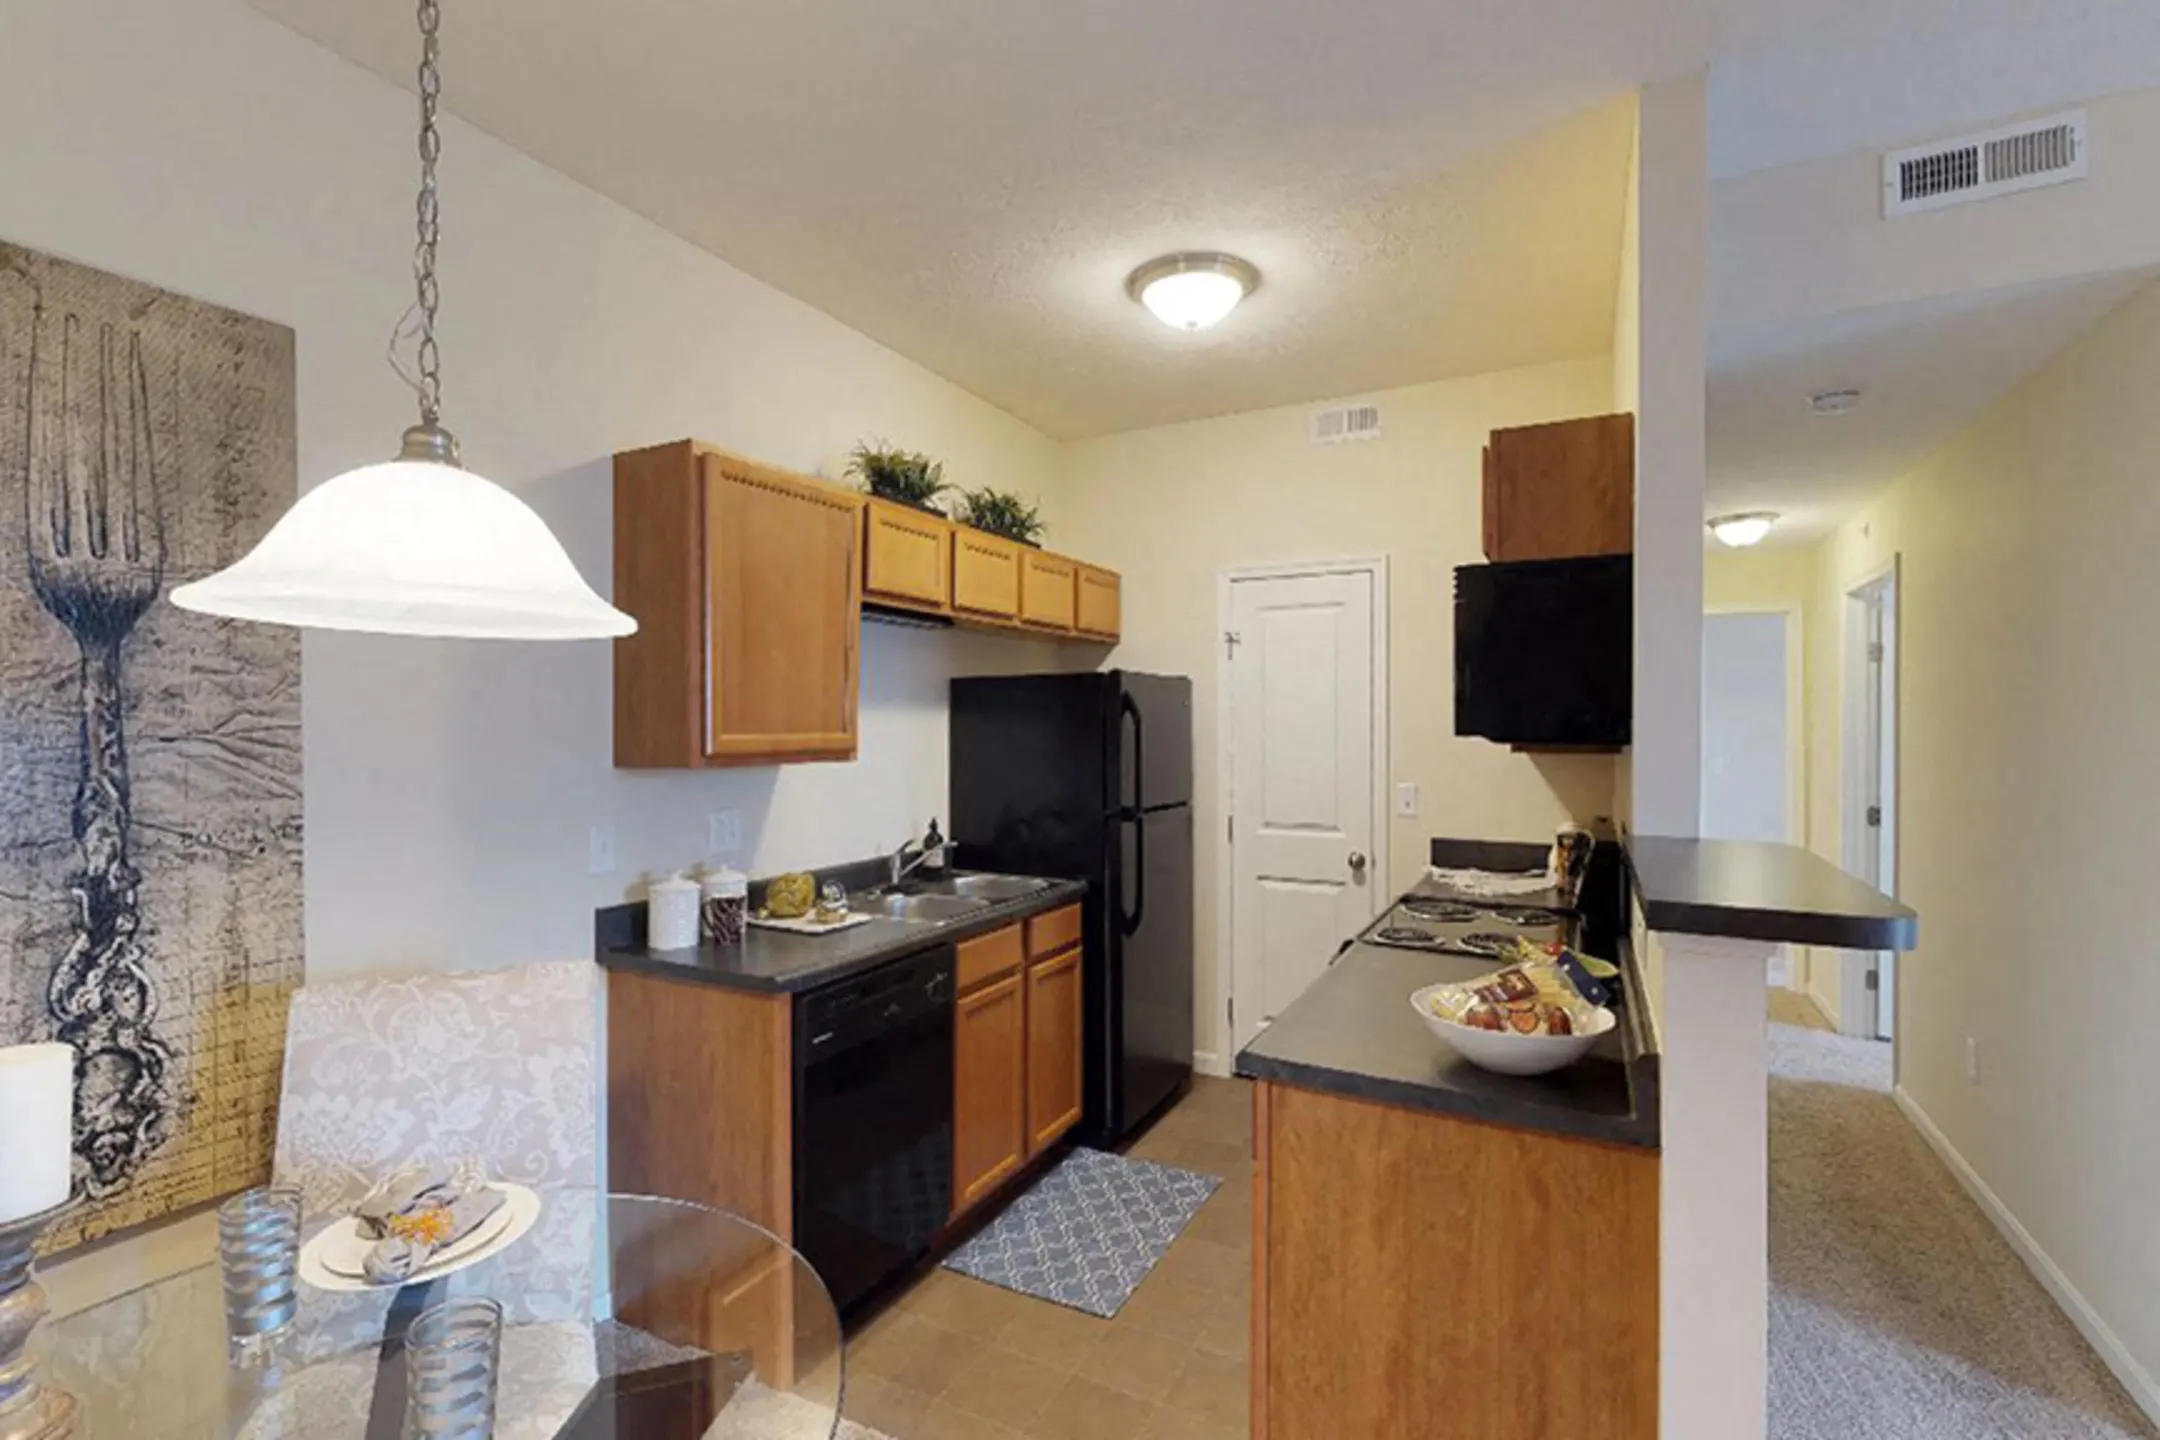 Kitchen - Residences at Northgate Crossing - Columbus, OH